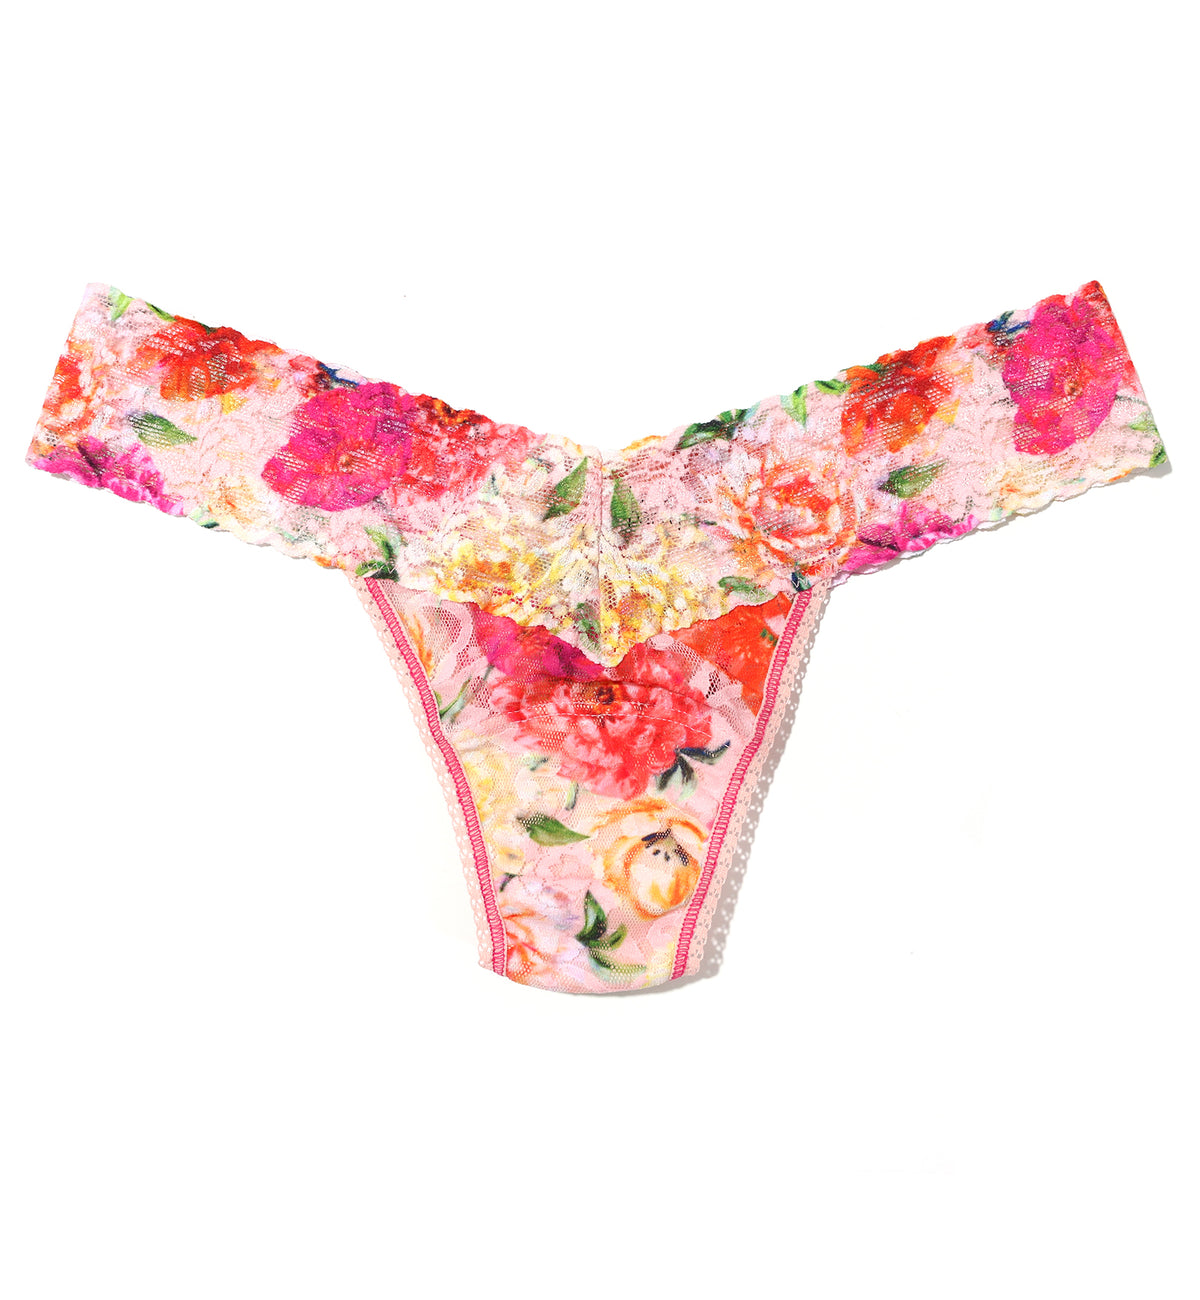 Hanky Panky Signature Lace Printed Low Rise Thong (PR4911P),Bring Me Flowers - Bring Me Flowers,One Size